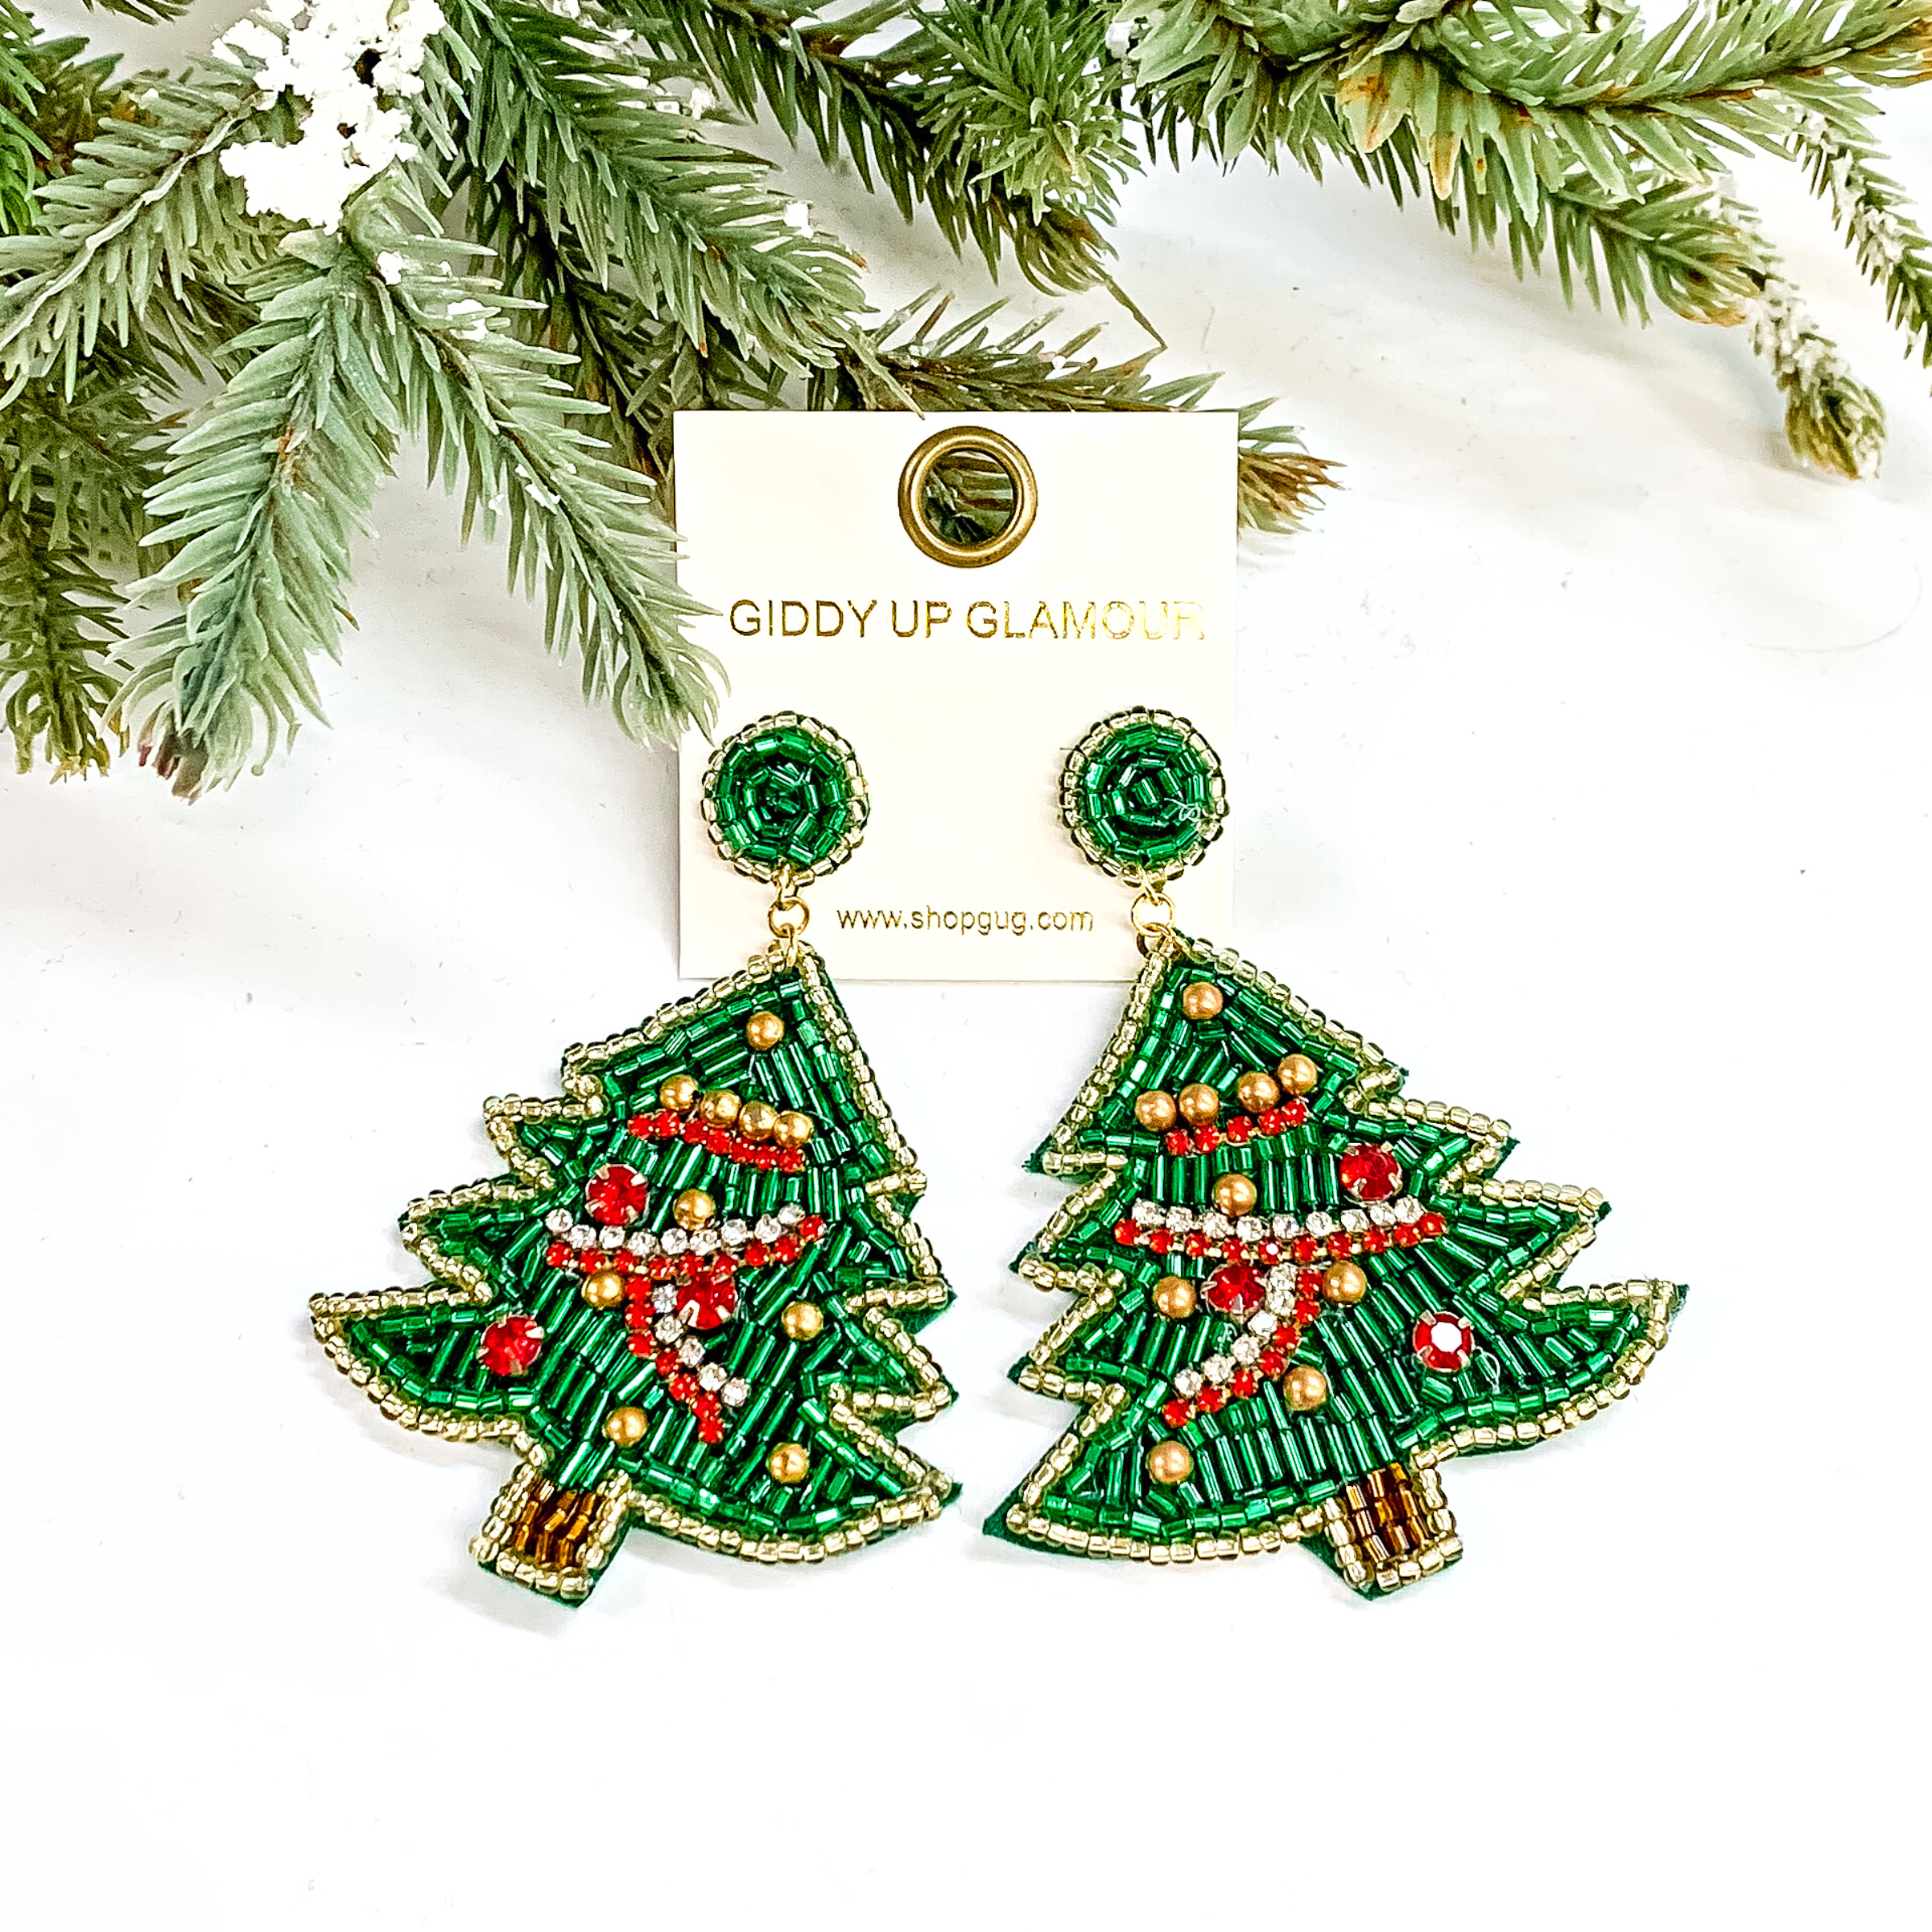 These are green beaded christmas tree earrings in different shapes and colors of beads. The tree has long green beads with a gold beaded outline and brown beaded stem. There are red and clear small crystals as the 'ribbon' , small red crystals and gold beads as oranaments. These earrings are taken on a white background with a green tree and snow in the back as decor.